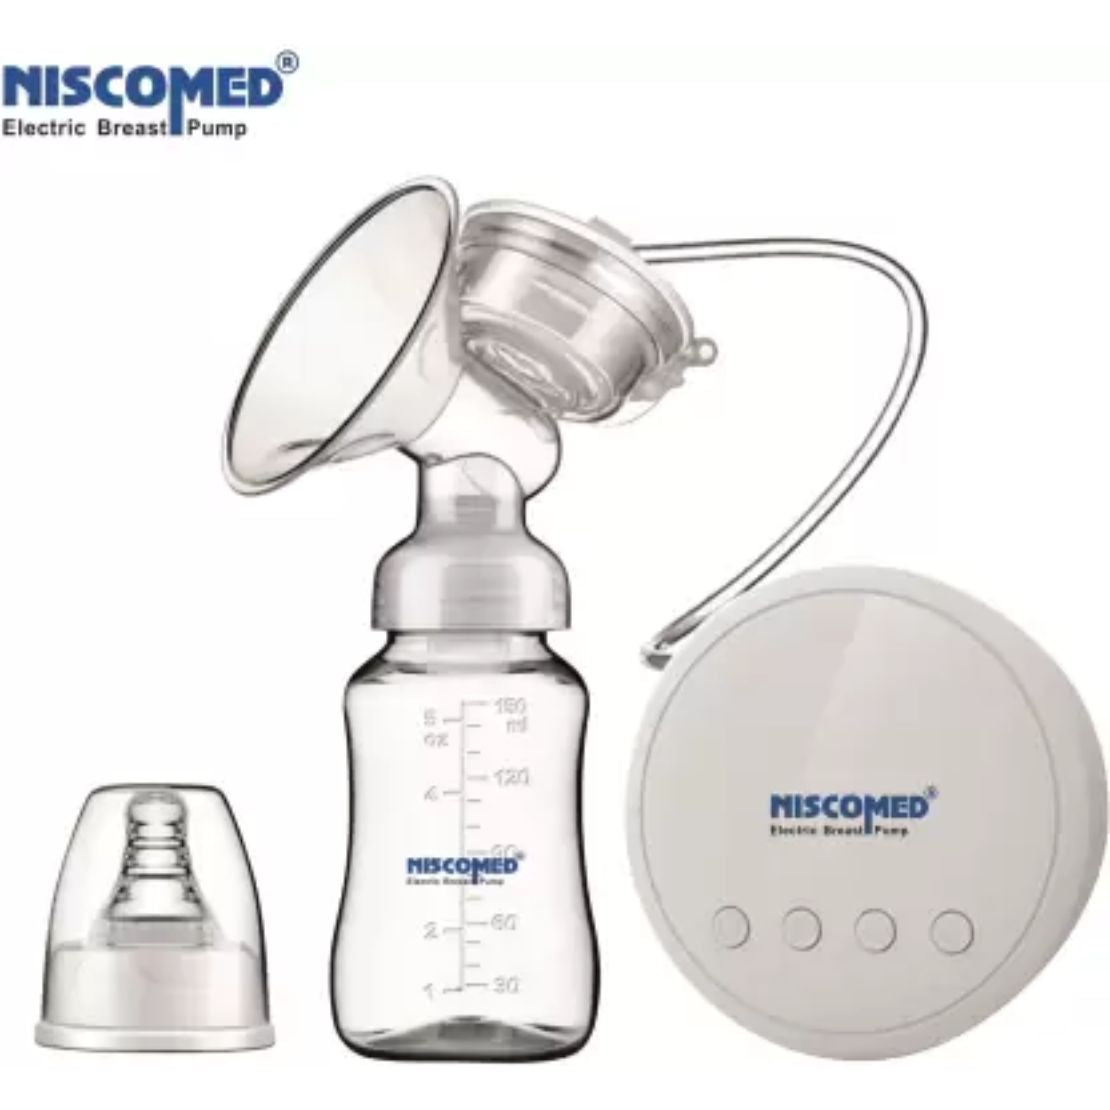 Niscomed Electric Breast Pump is electric powered suction device used to express and collect breast milk from lactating mother. This Product follows a baby's natural nursing rhythm.